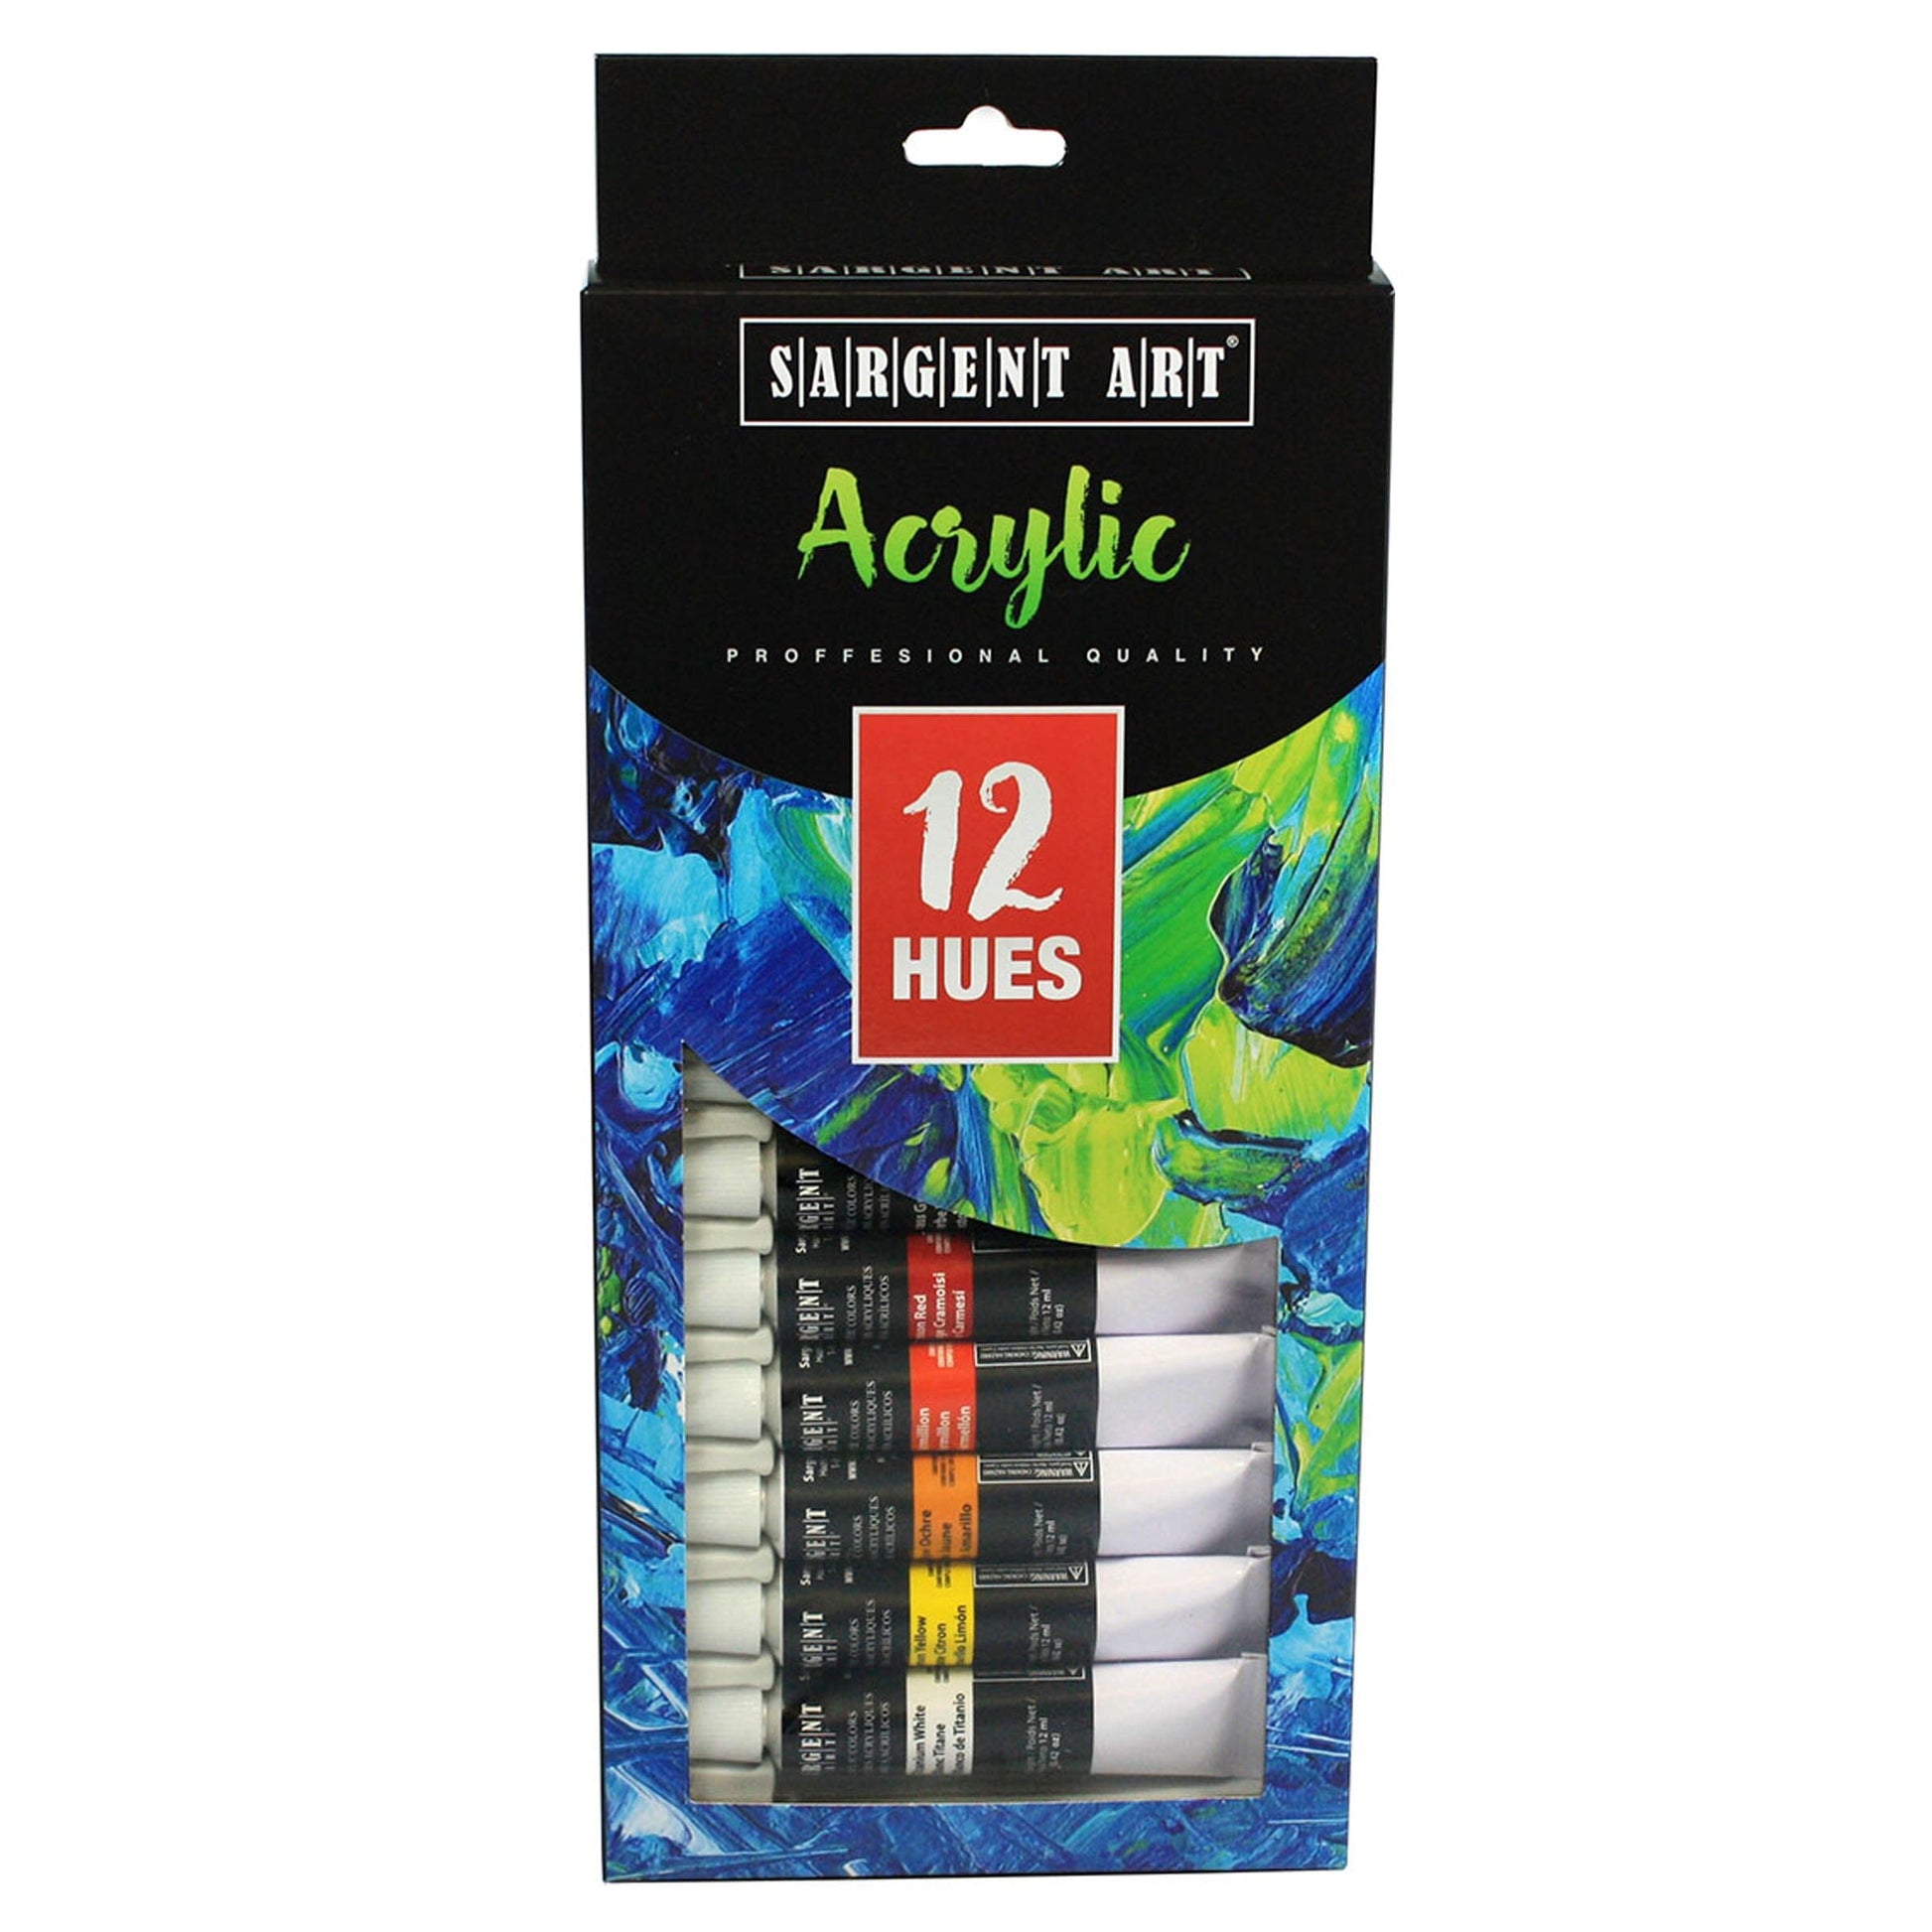 talens art creation acrylic 12ml tube sets, assorted sizes – A Paper Hat